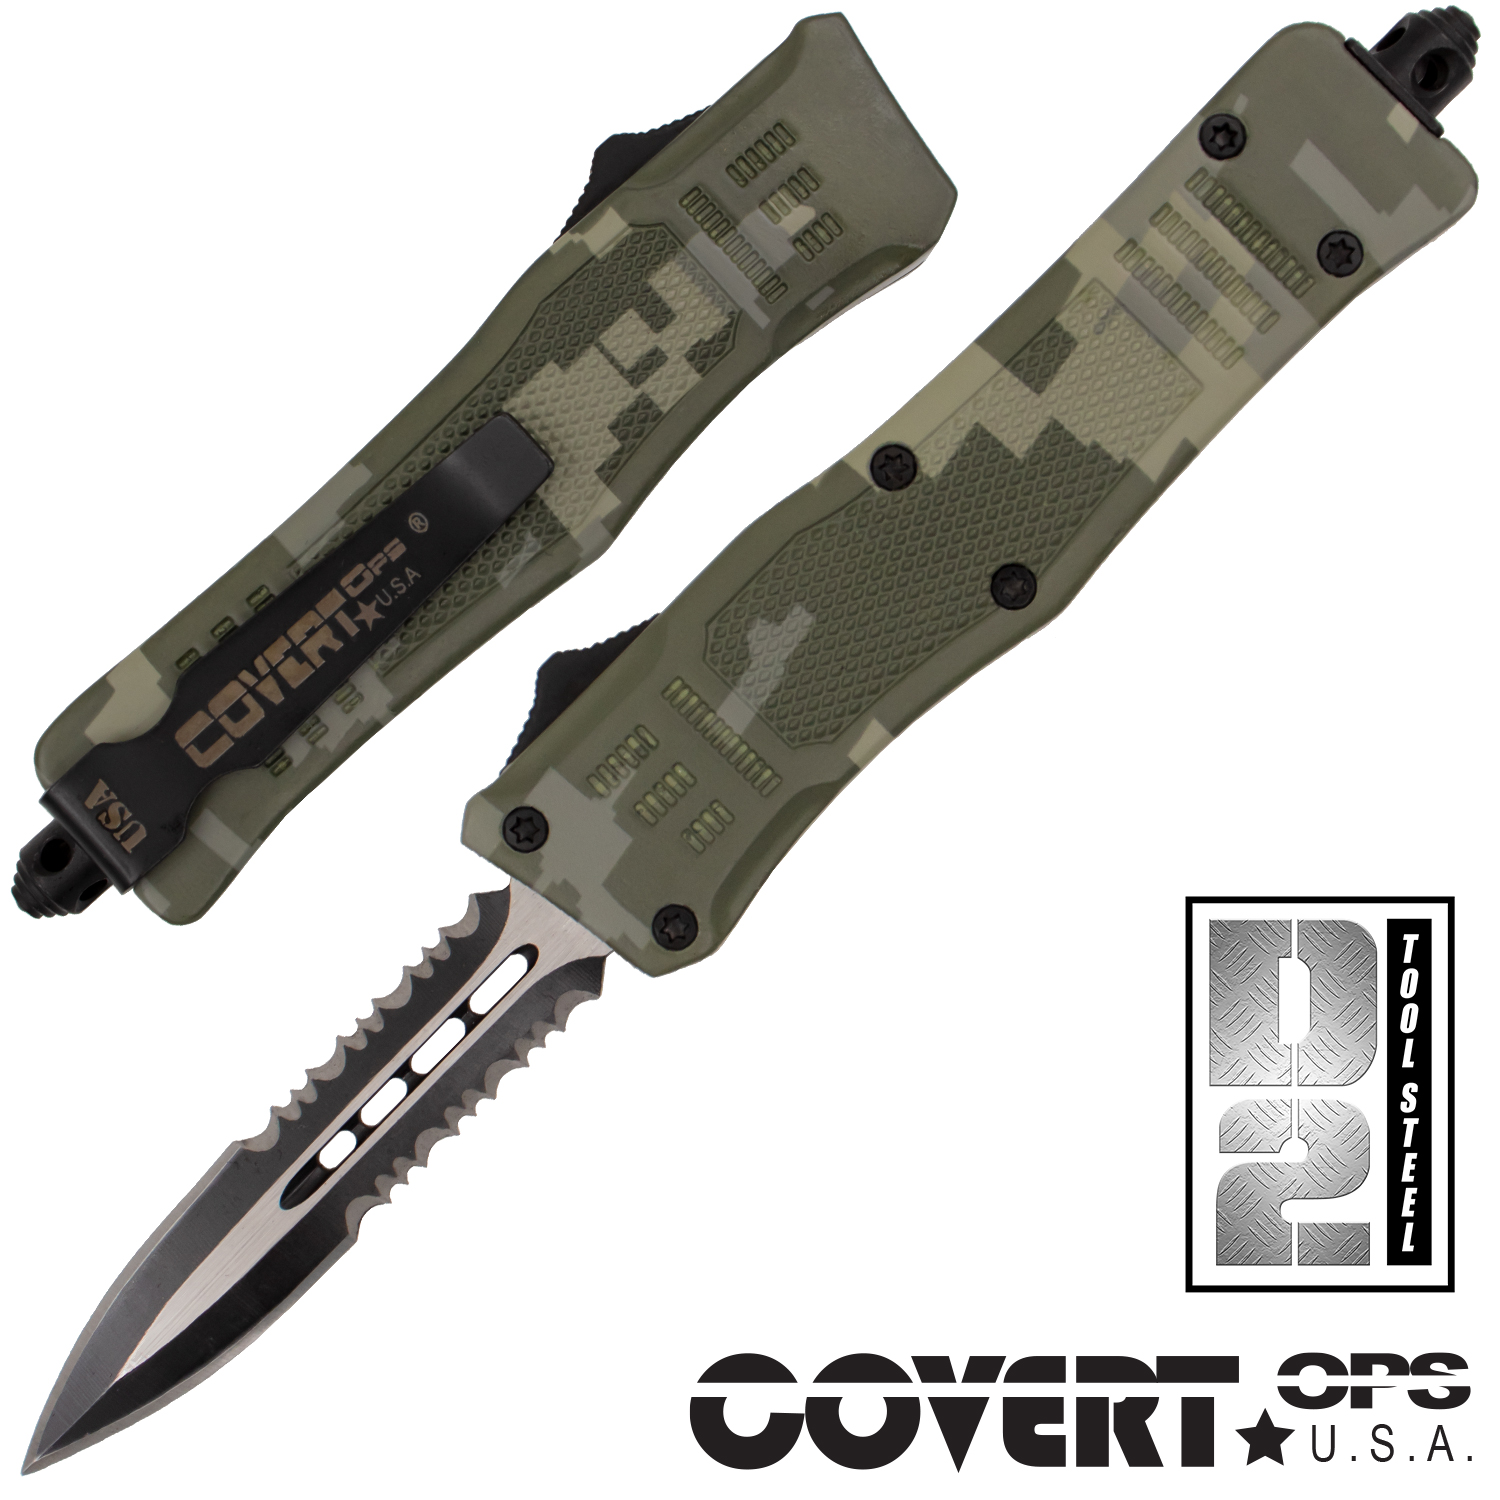 Covert Ops Automatic OTF 7 Inch Auto DE Blade with Case Serr